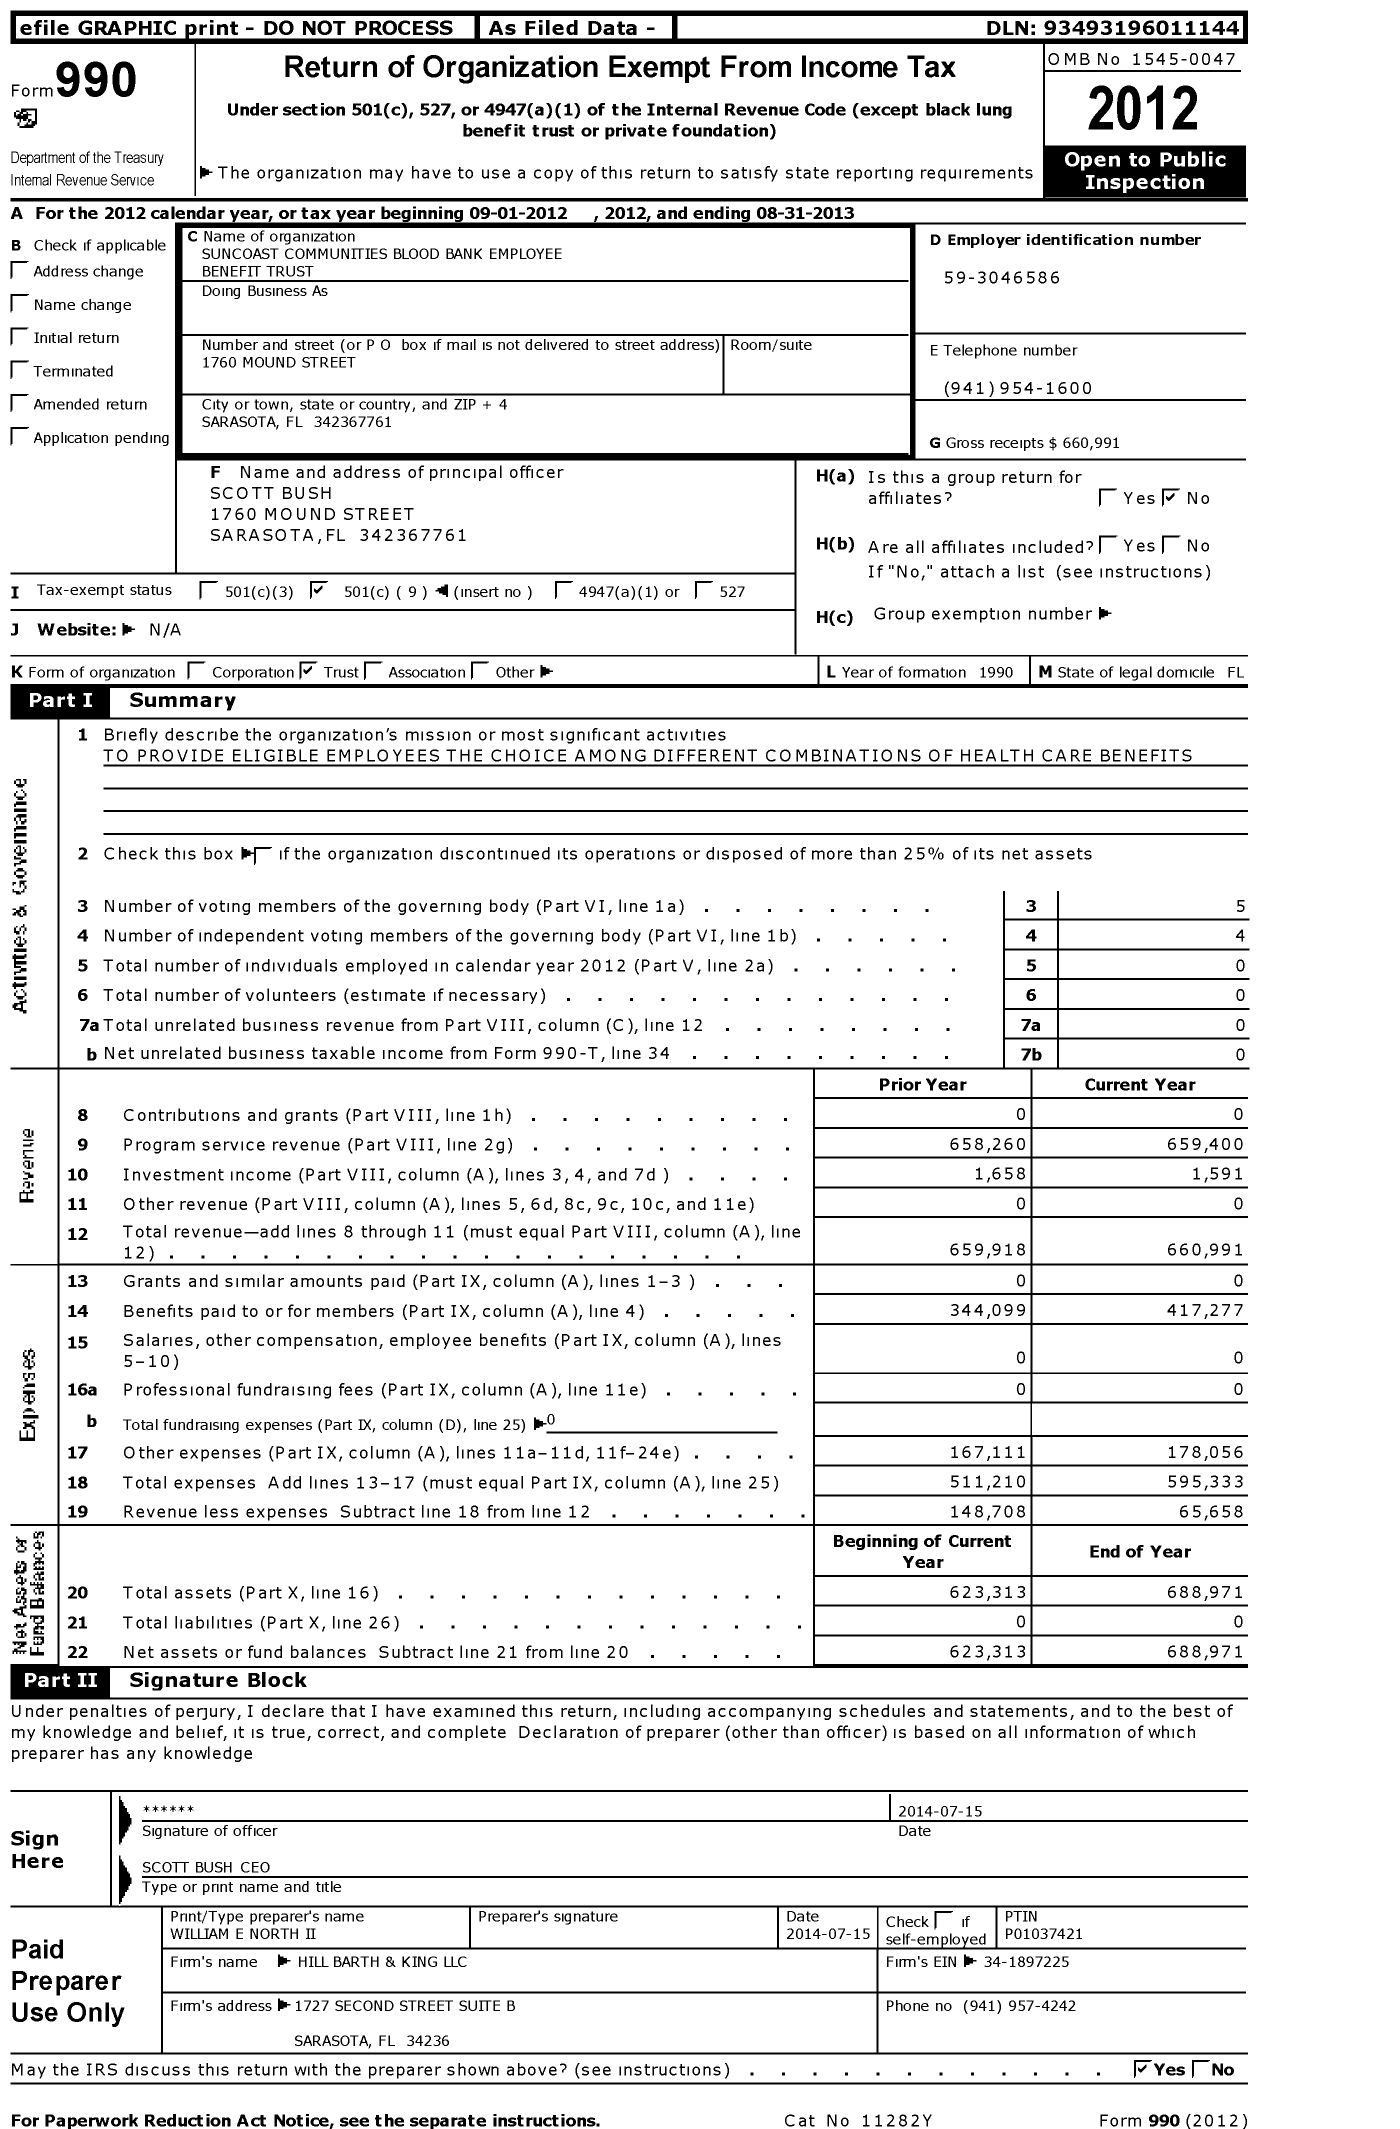 Image of first page of 2012 Form 990O for Suncoast Communities Blood Bank Employee Benefit Trust